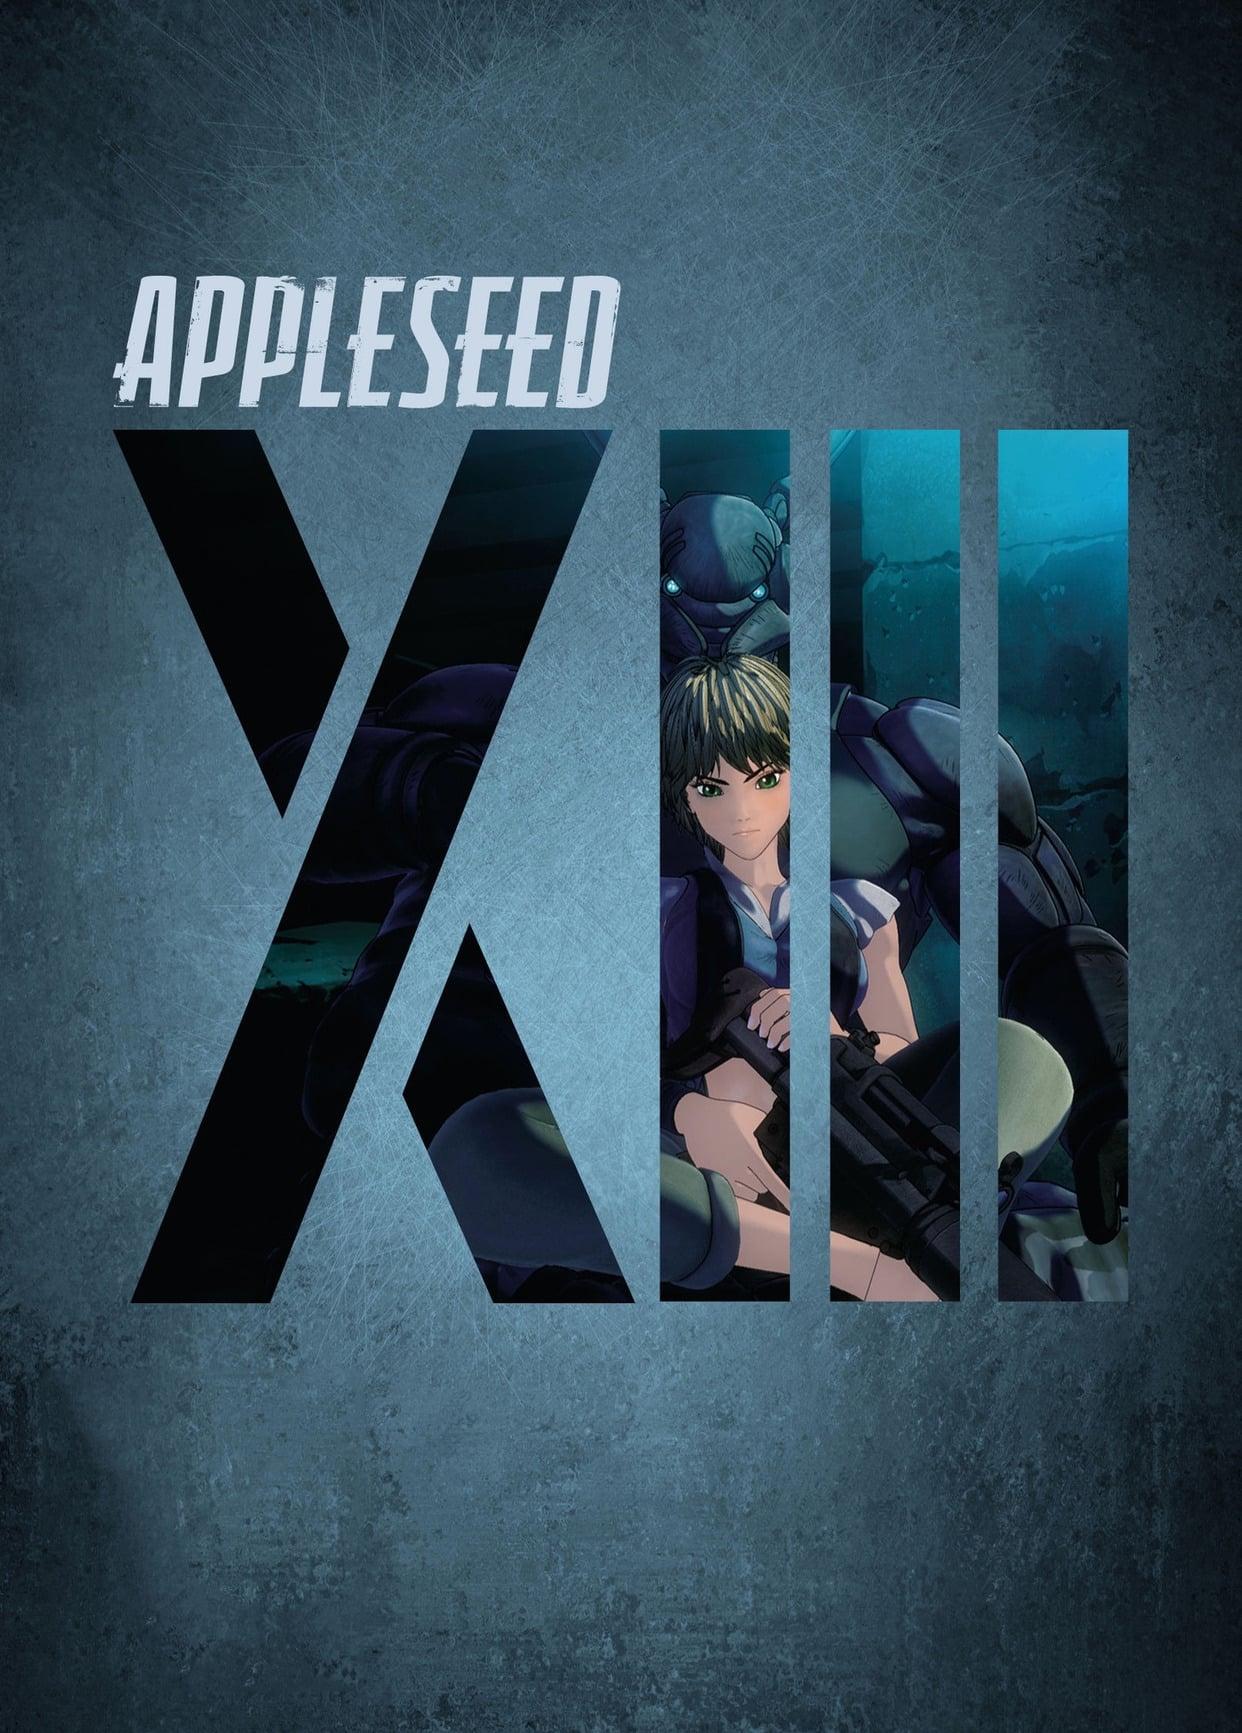 Appleseed XIII poster